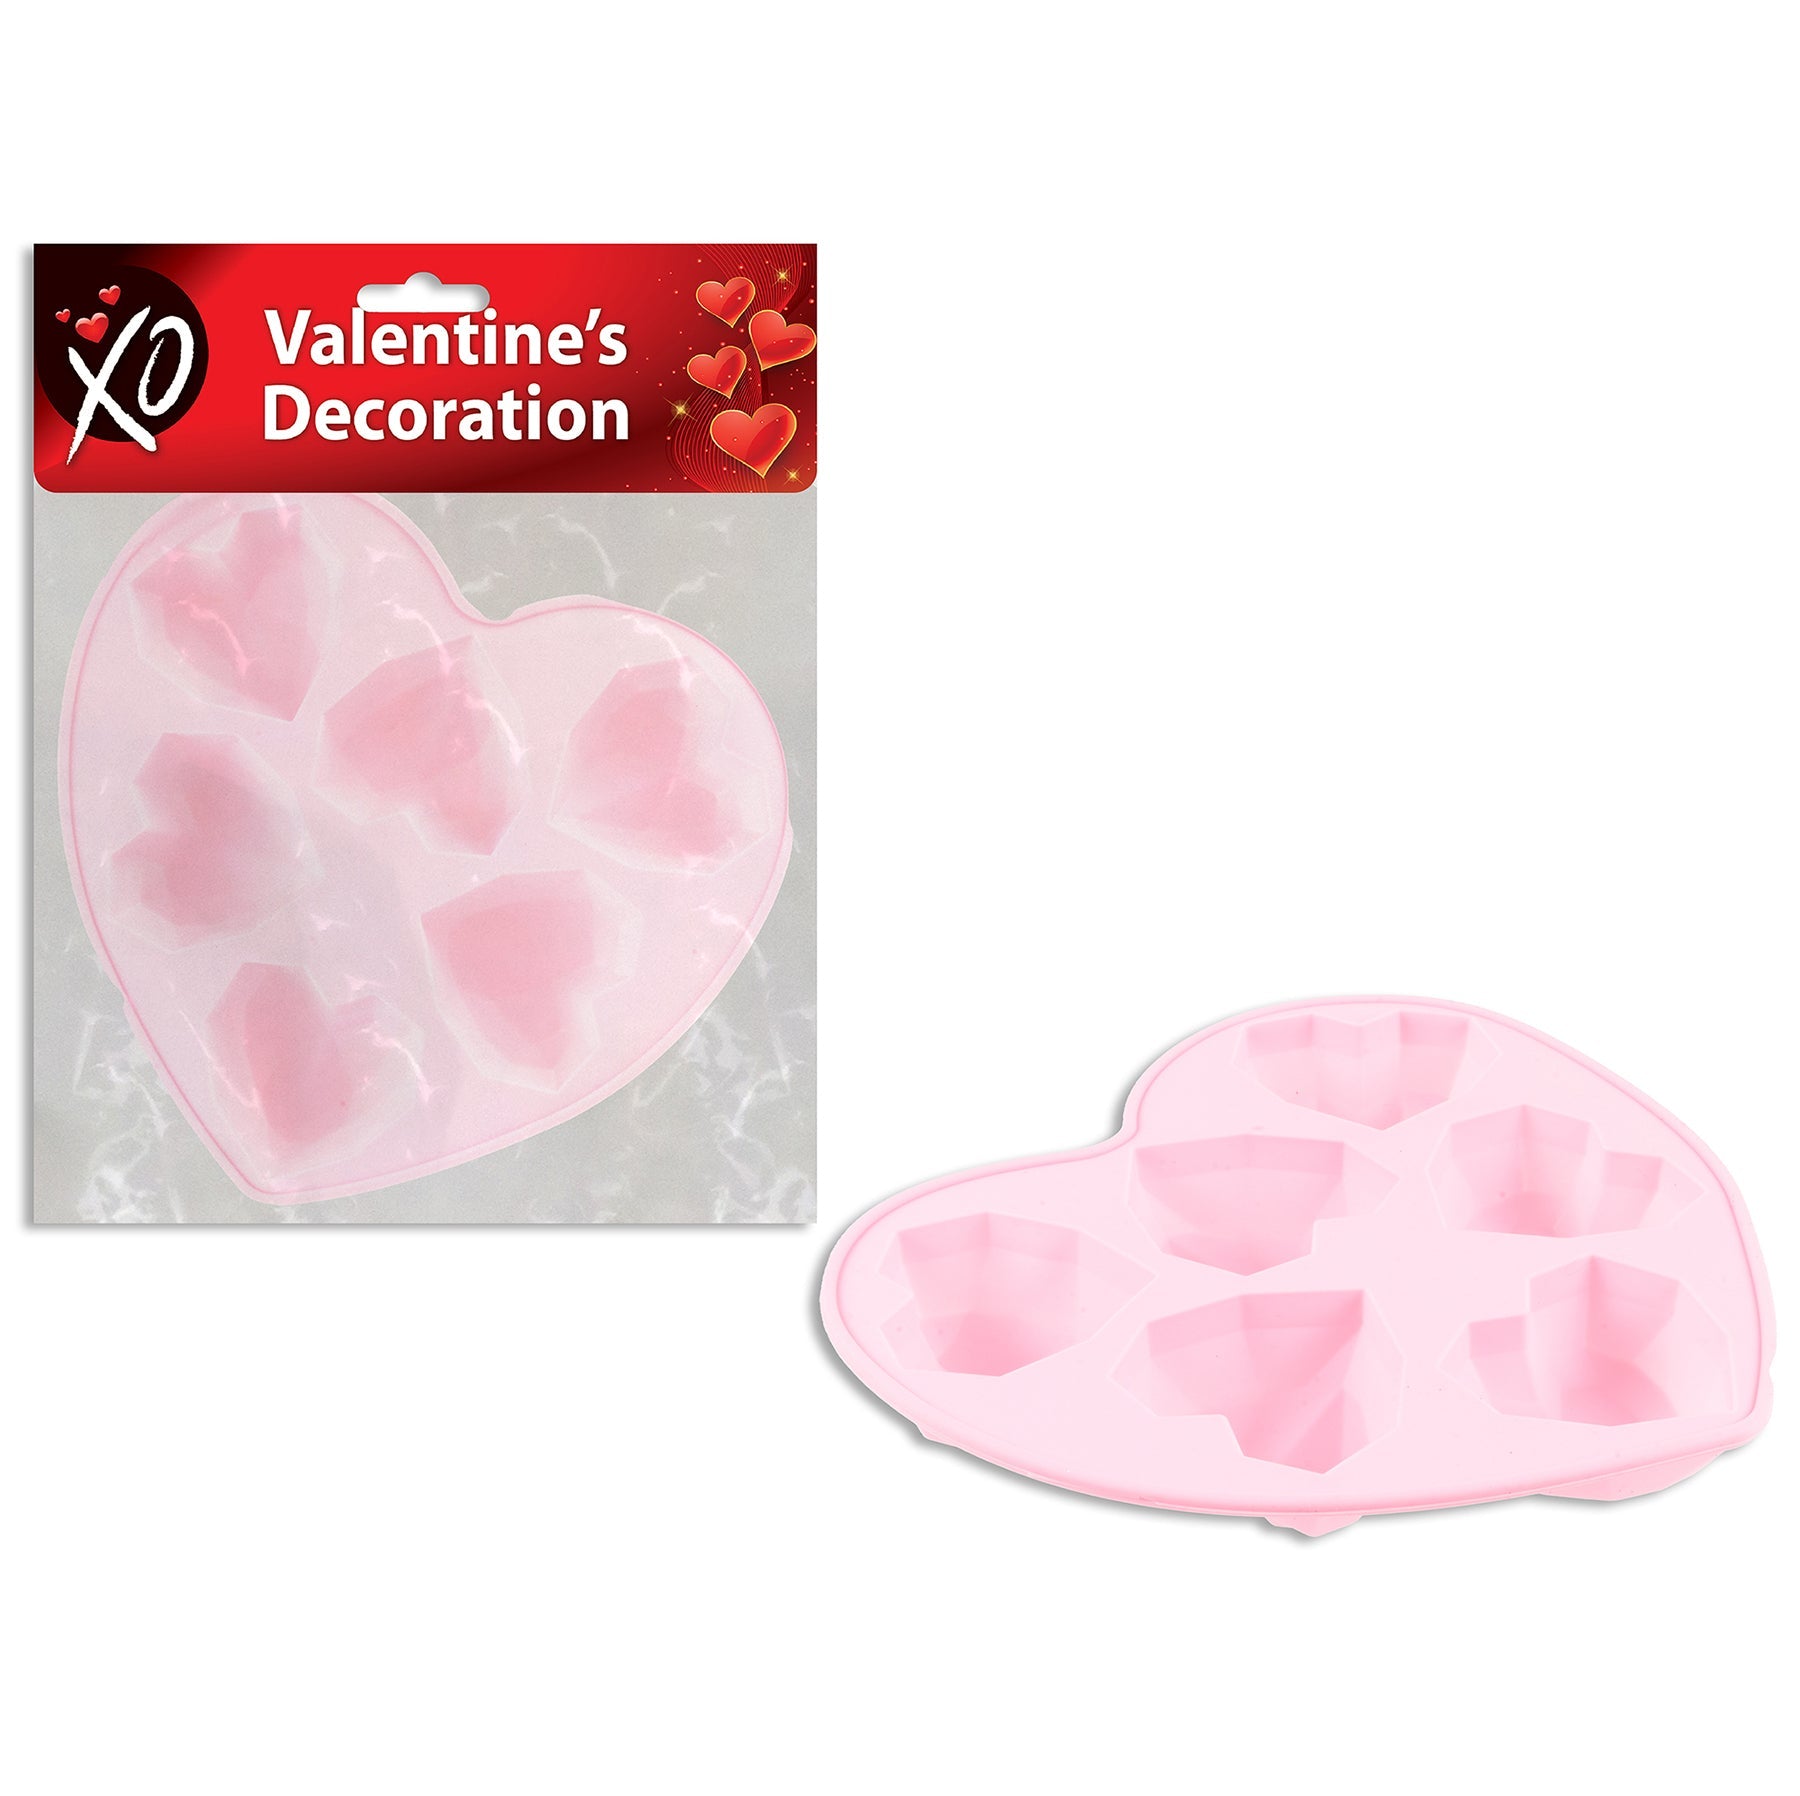 Valentine Hearts Silicone Baking / Chocolate Mold with 6 Cavities 8in